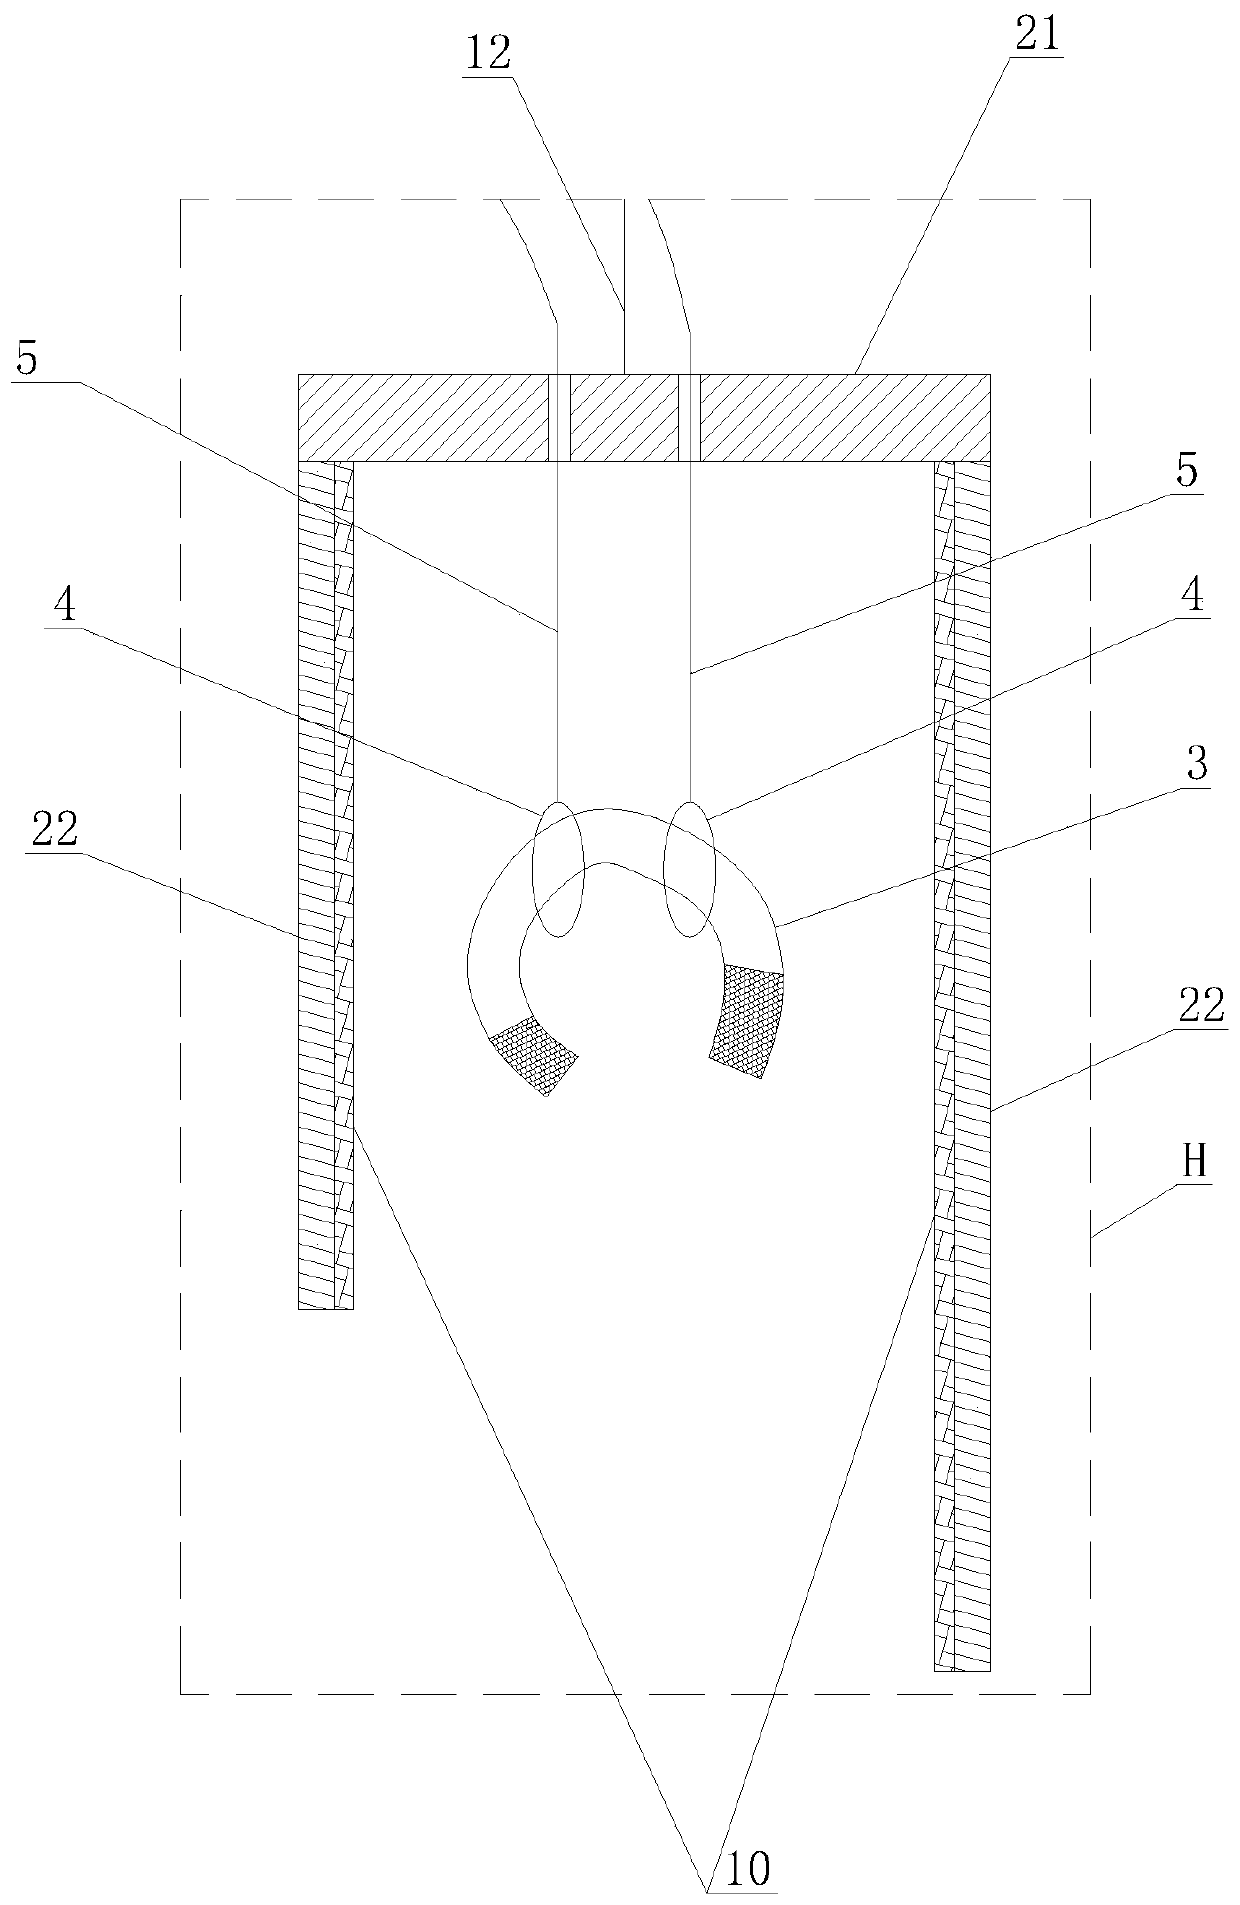 Suspension traction device for dual lower limbs of infant